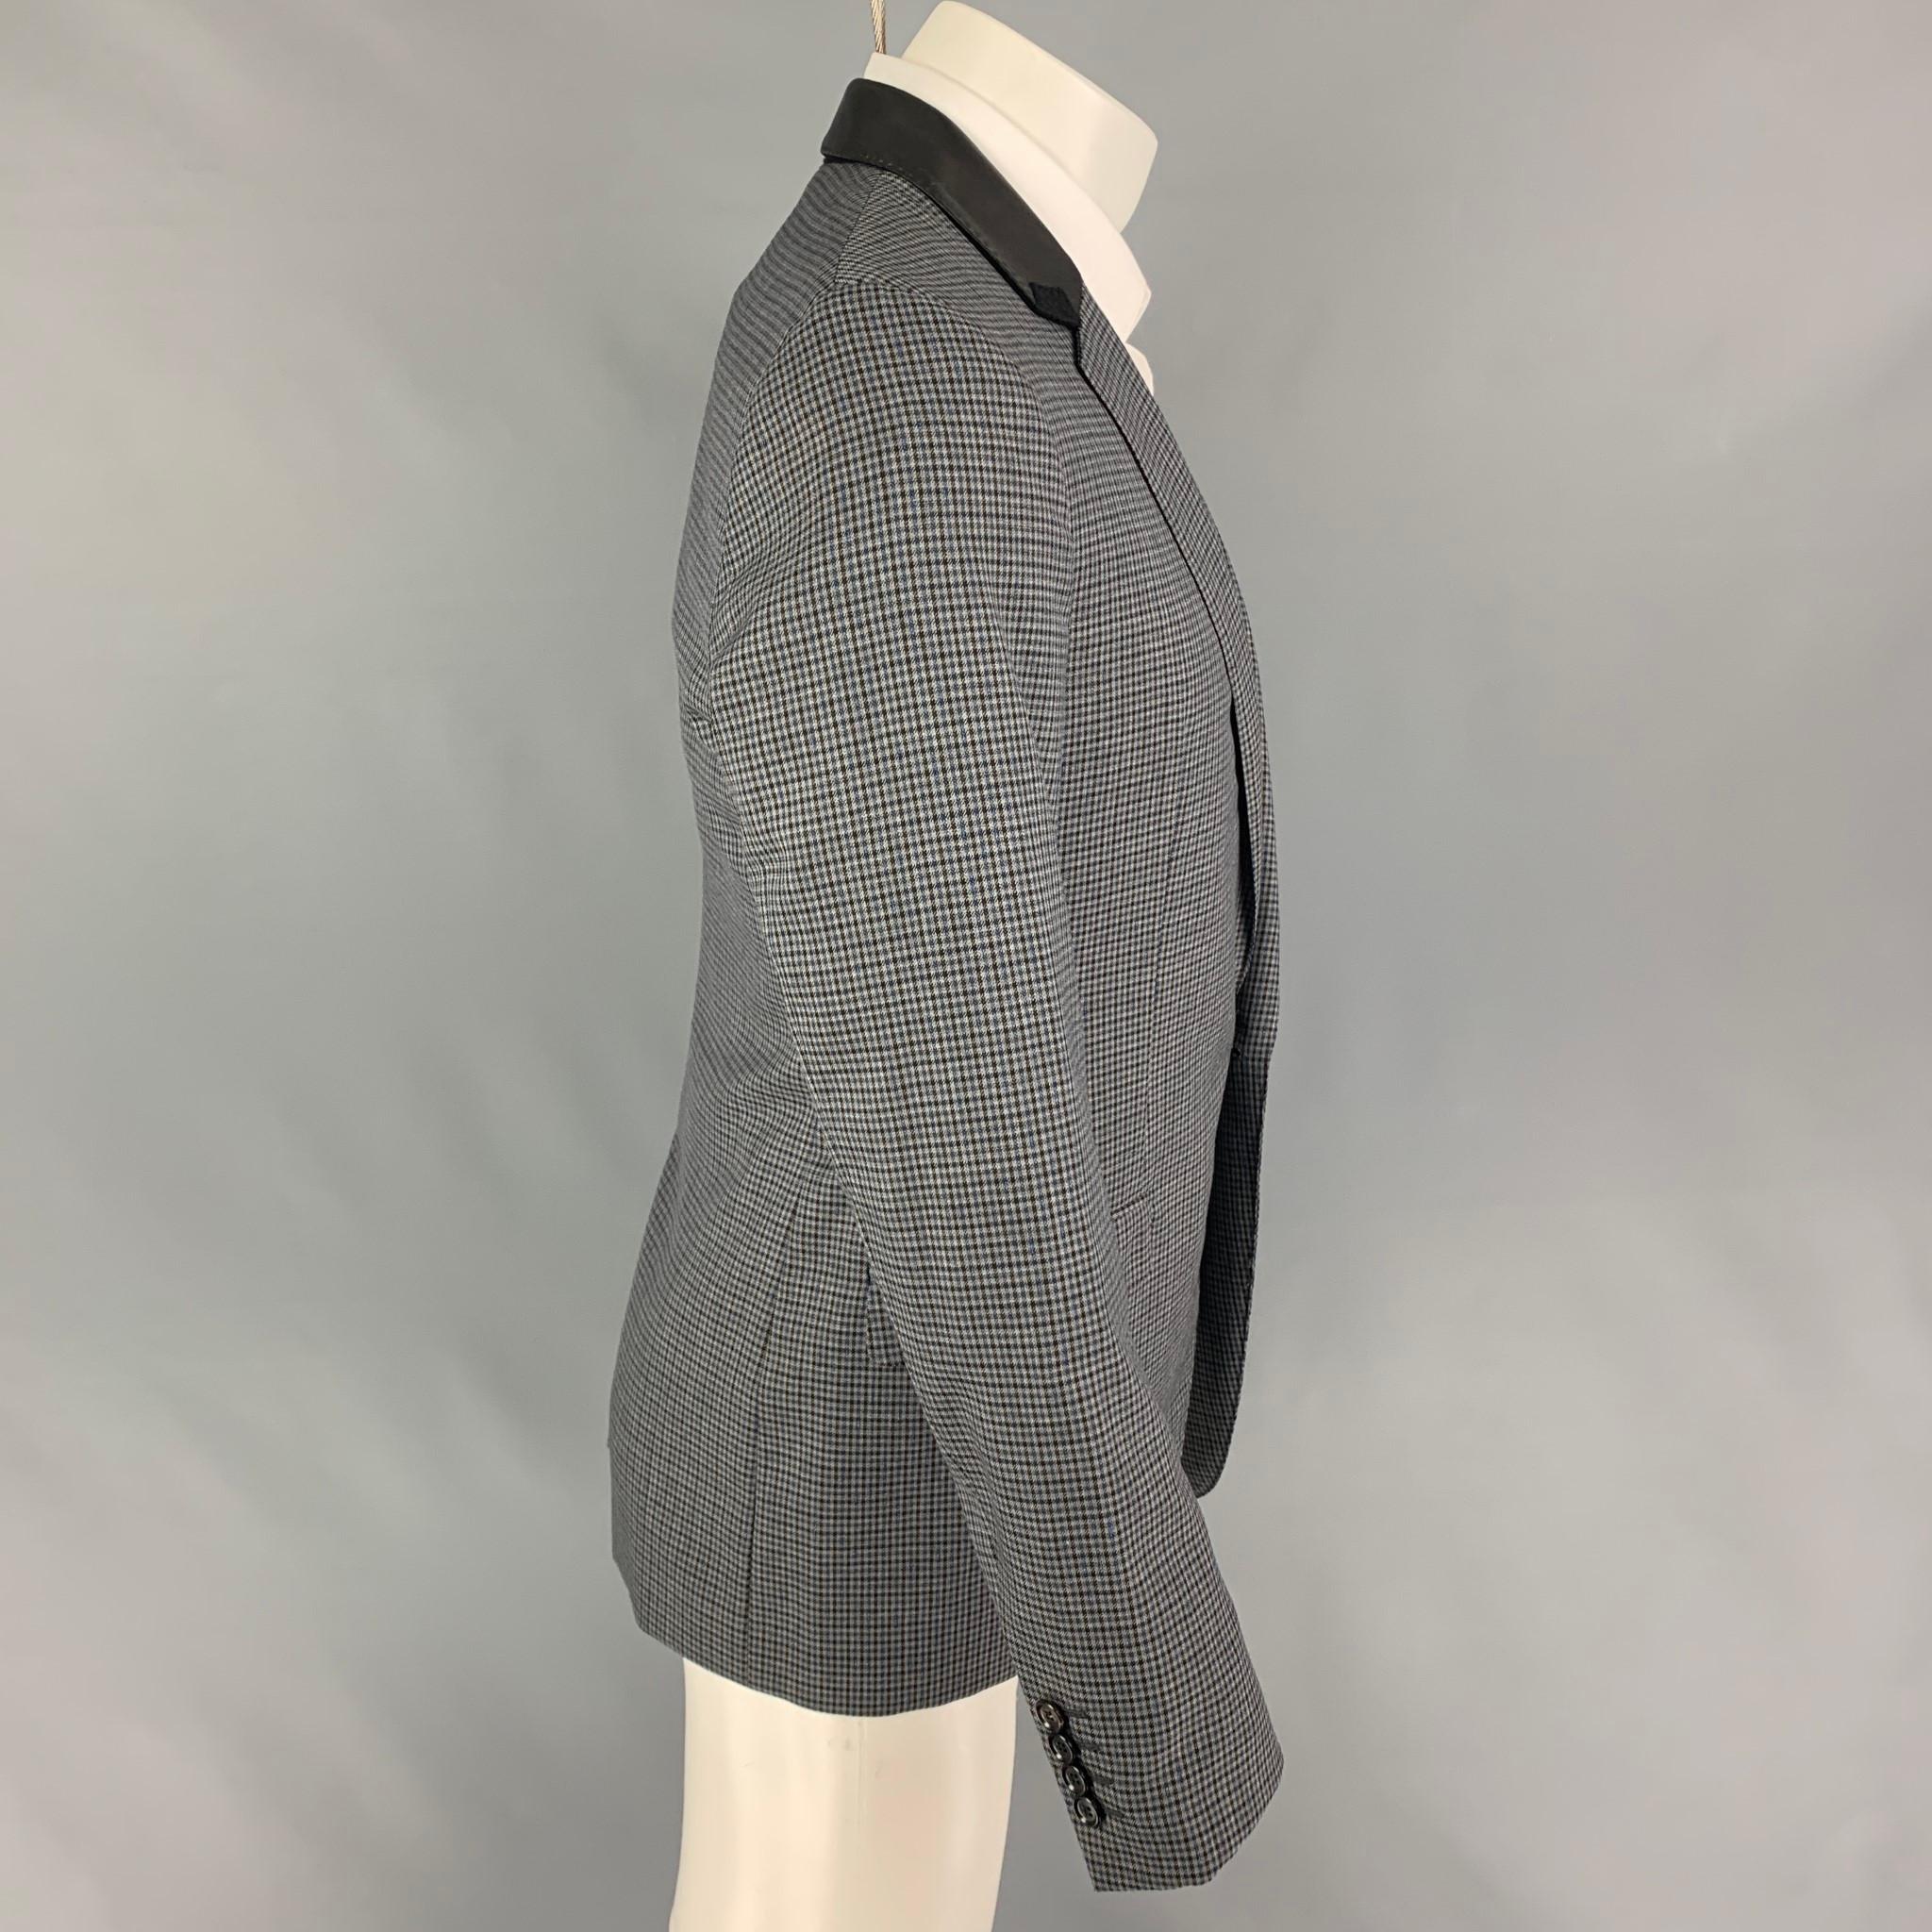 LANVIN sport coat comes in a grey, black, blue plaid wool with a full liner featuring a notch lapel, leather trim, flap pockets, single back vent, and a single button closure. Made in Italy. 

Very Good Pre-Owned Condition.
Marked: